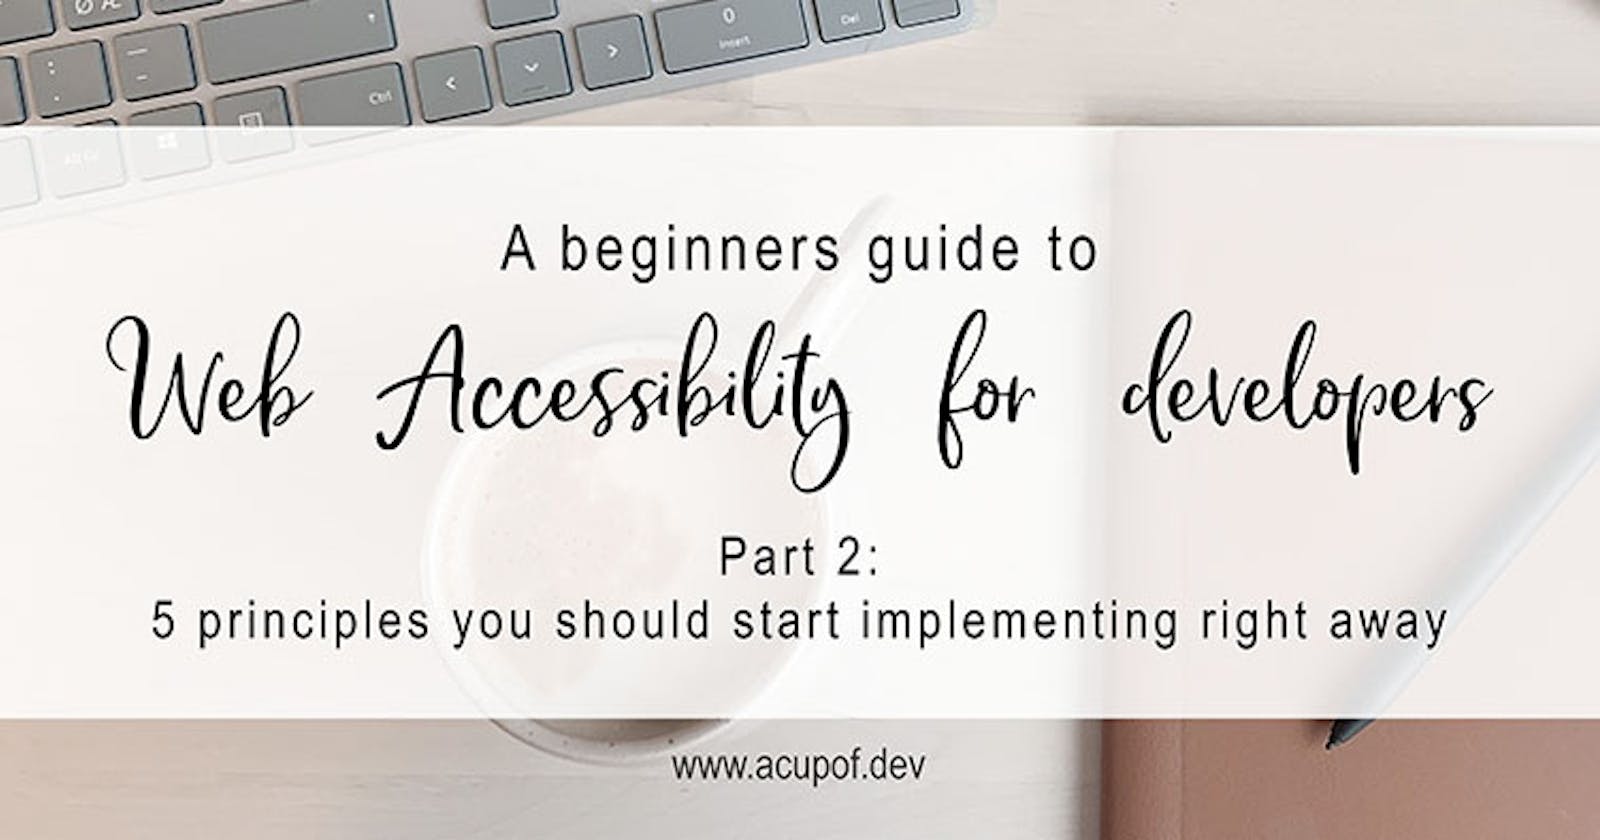 5 accessibility principles you should start implementing right away